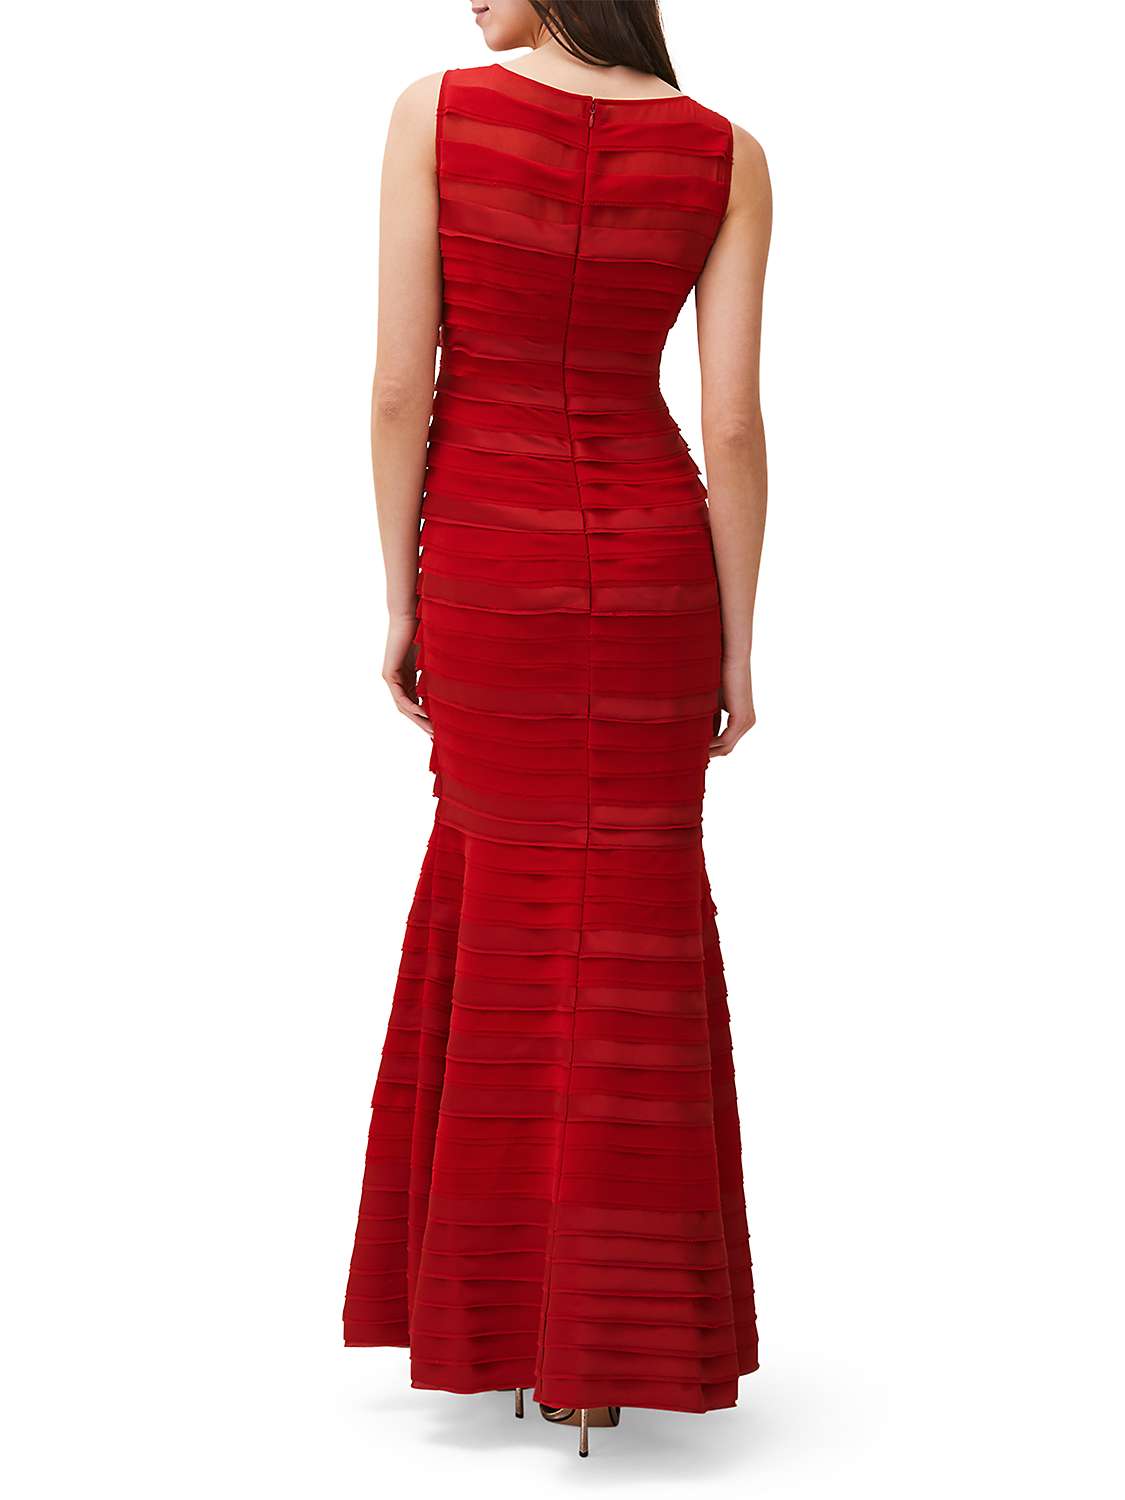 Buy Phase Eight Shannon Dress, Scarlet Online at johnlewis.com